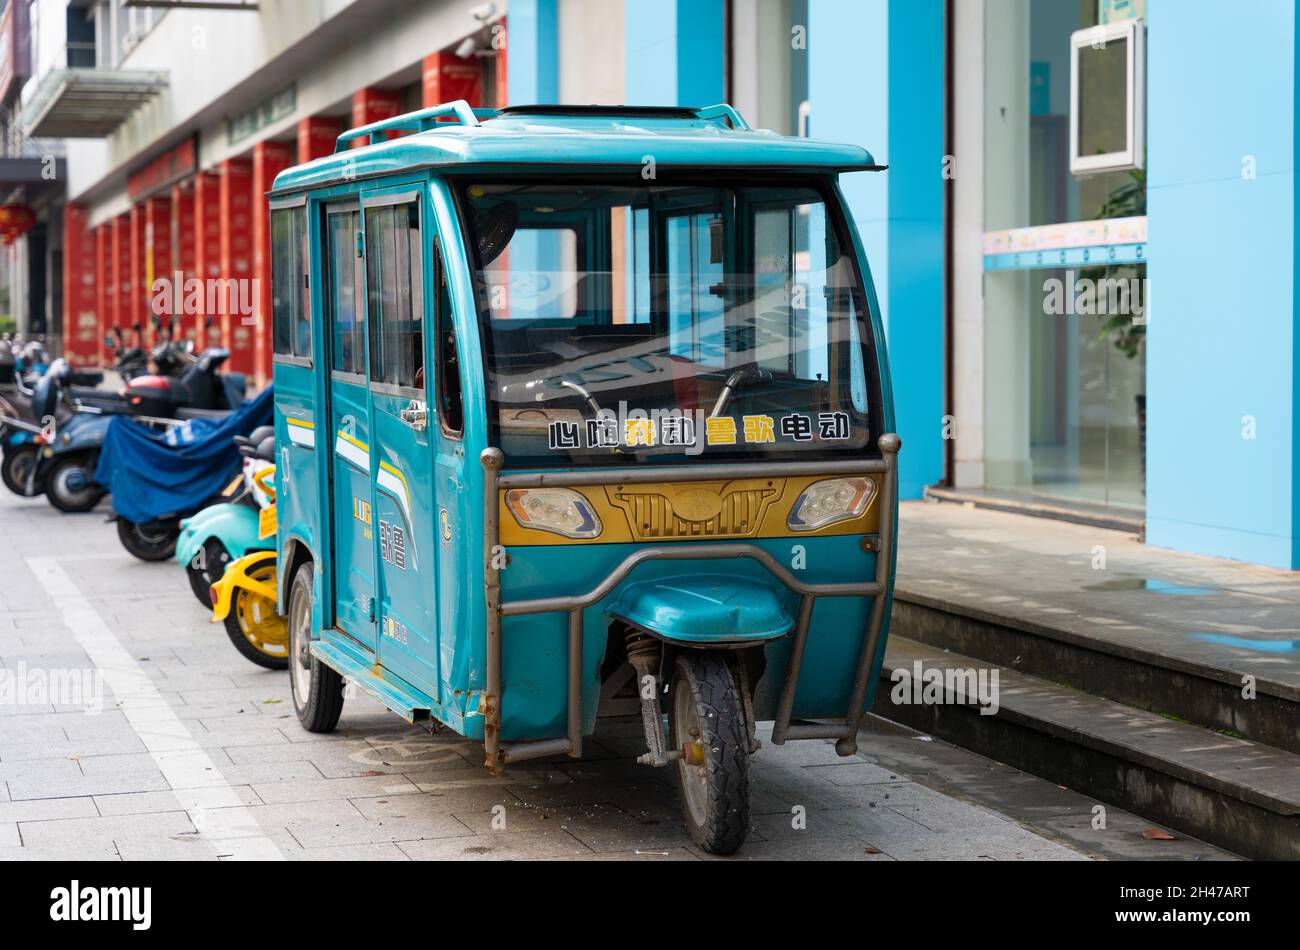 RUI'AN, WENZHOU, ZHEJIANG, CHINA - OCT 22, 2021: A tuk-tuk parked in front of a building. Stock Photo